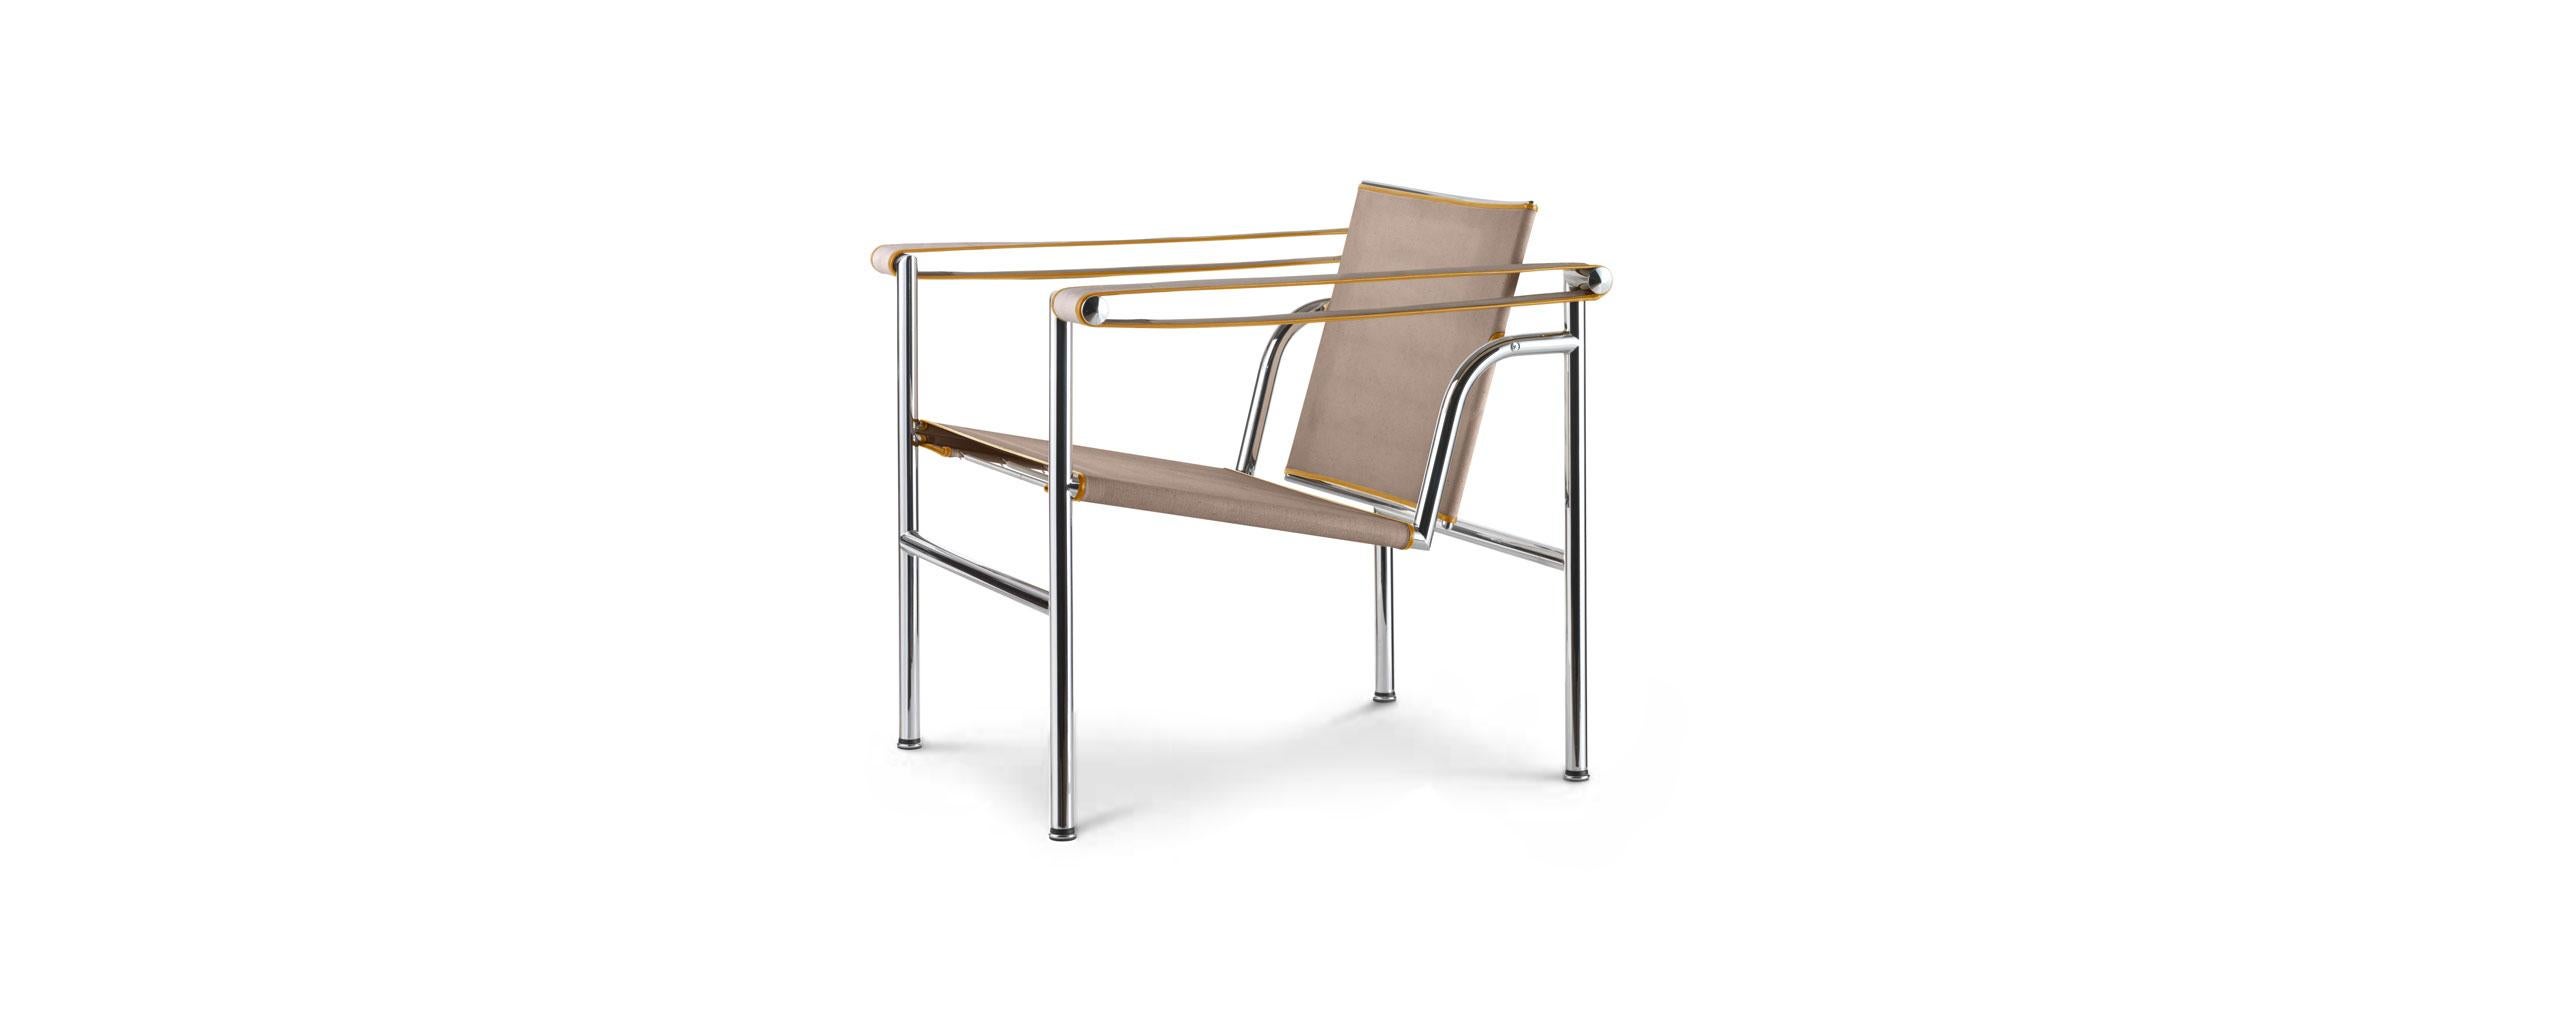 Chair designed by Le Corbusier, Pierre Jeanneret, Charlotte Perriand in 1928. Relaunched in 2011.
Manufactured by Cassina in Italy.

Armchair with structure in polished trivalent chrome plated (CR3) steel. The armrests are wider at the front and